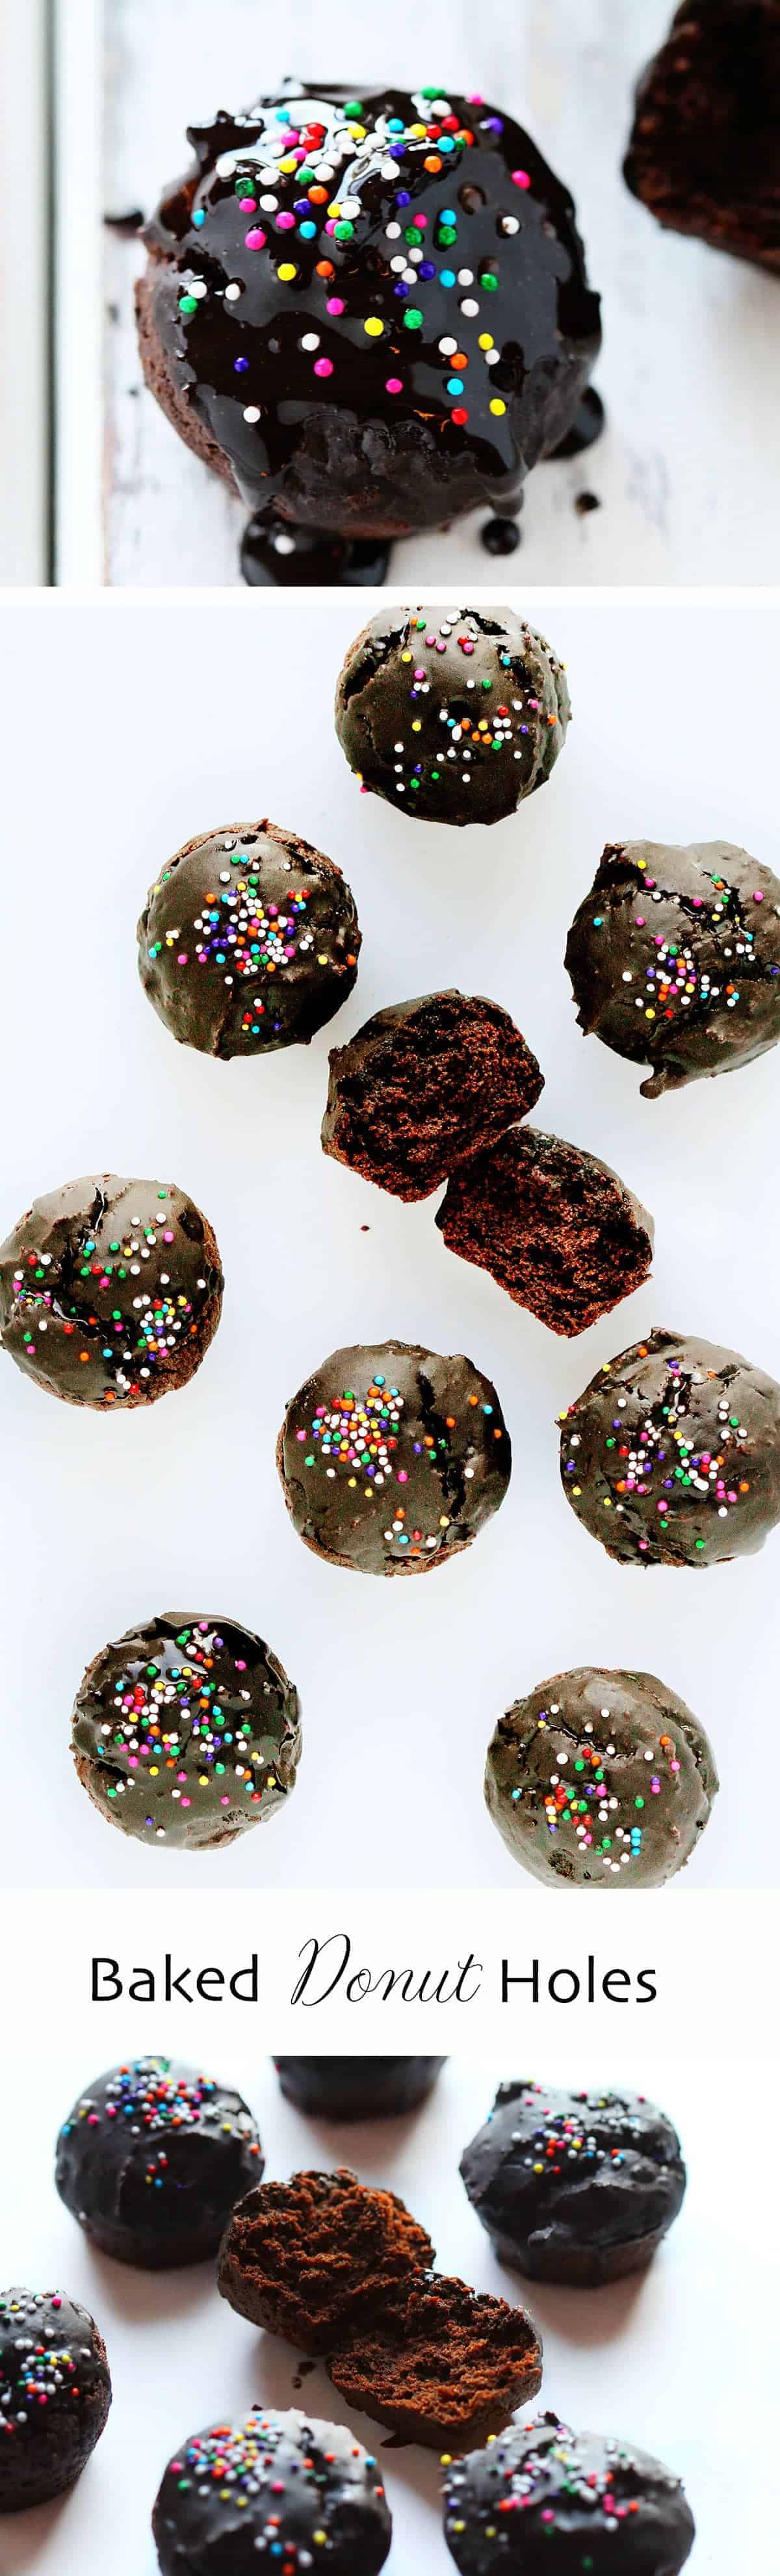 Chocolate Donut Holes with Chocolate Glaze... this is the way to start the day!